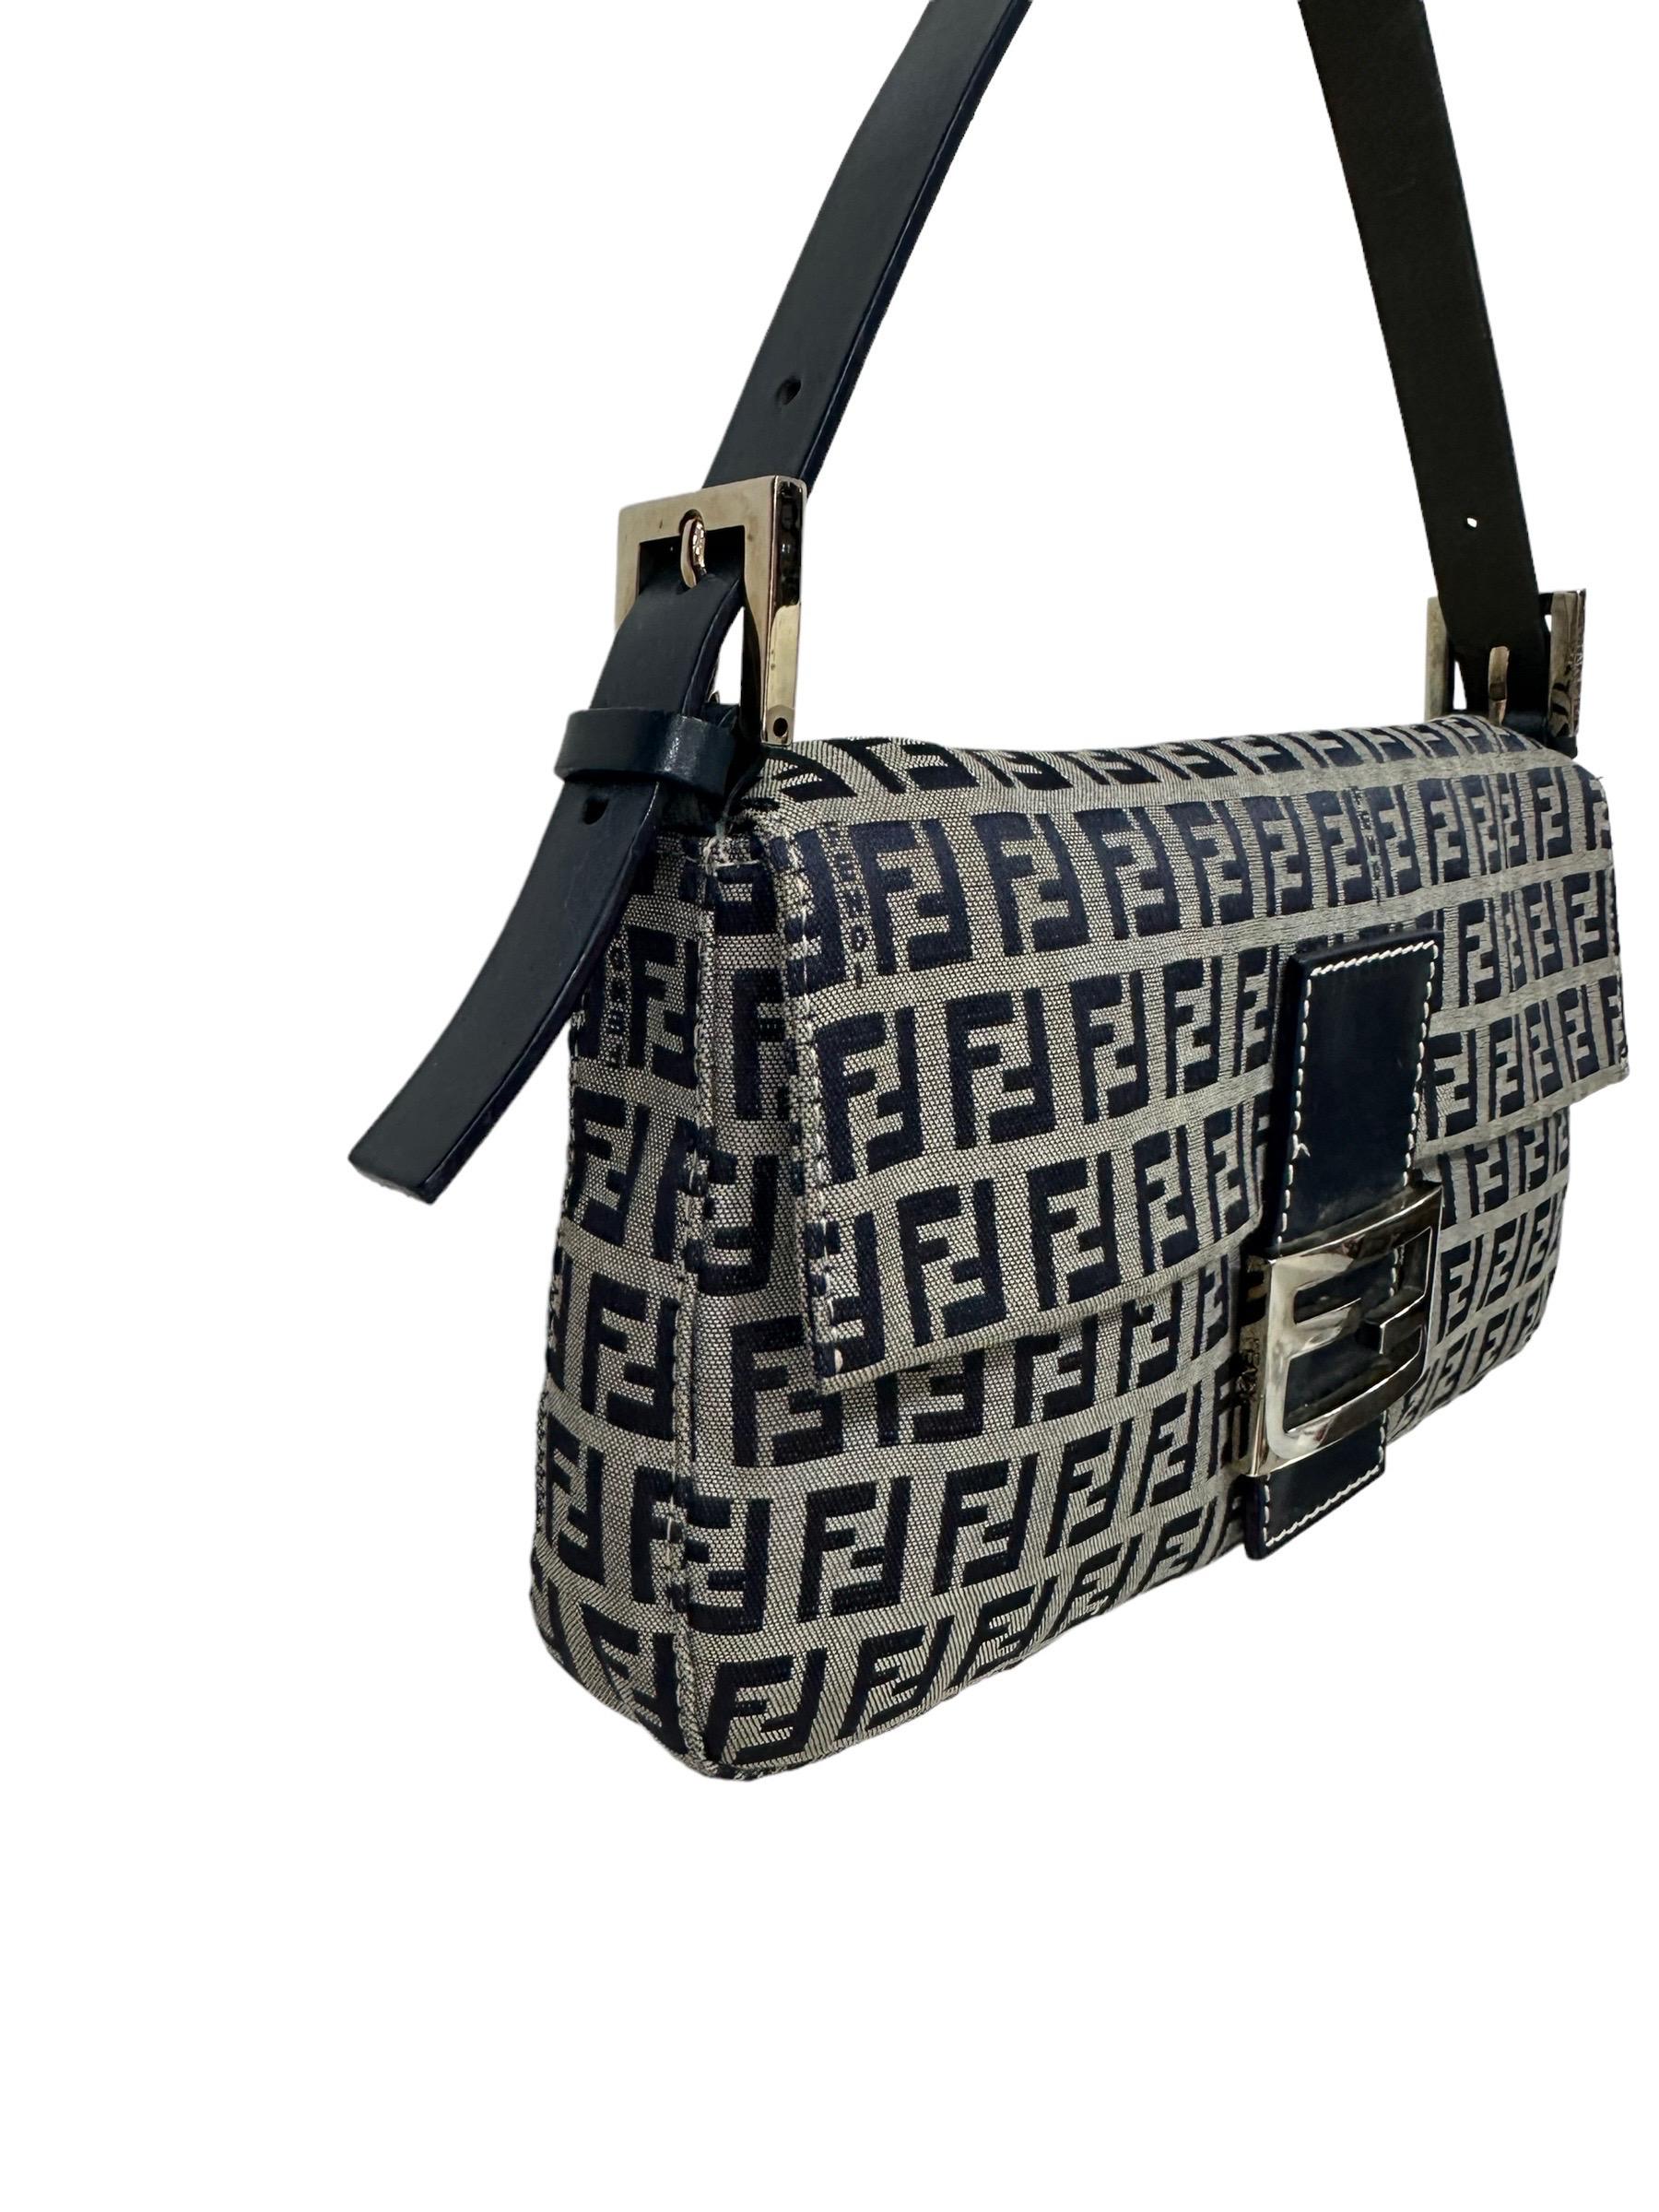 Bag by Fendi, Baguette model, made of gray FF ​​canvas, with blue leather inserts and silver hardware. Equipped with a flap with magnetic button closure, internally lined in blue satin, roomy for the essentials. Equipped with a smooth blue leather